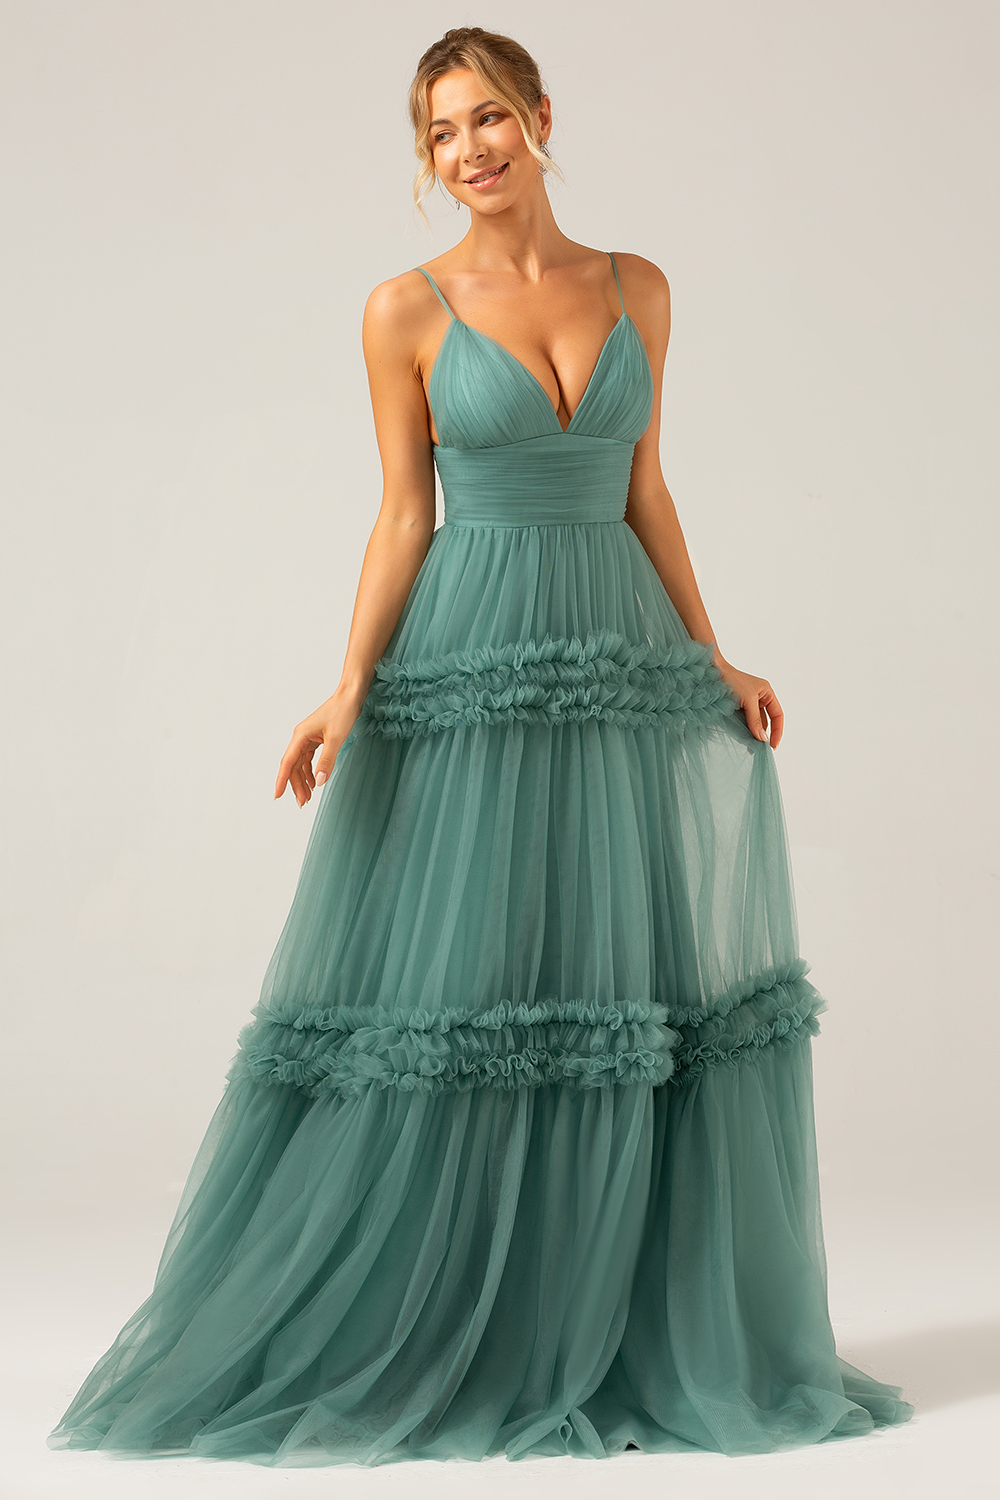 Grey Green A Line Backless Tulle Pleated Spaghetti Straps Long Bridesmaid Dress